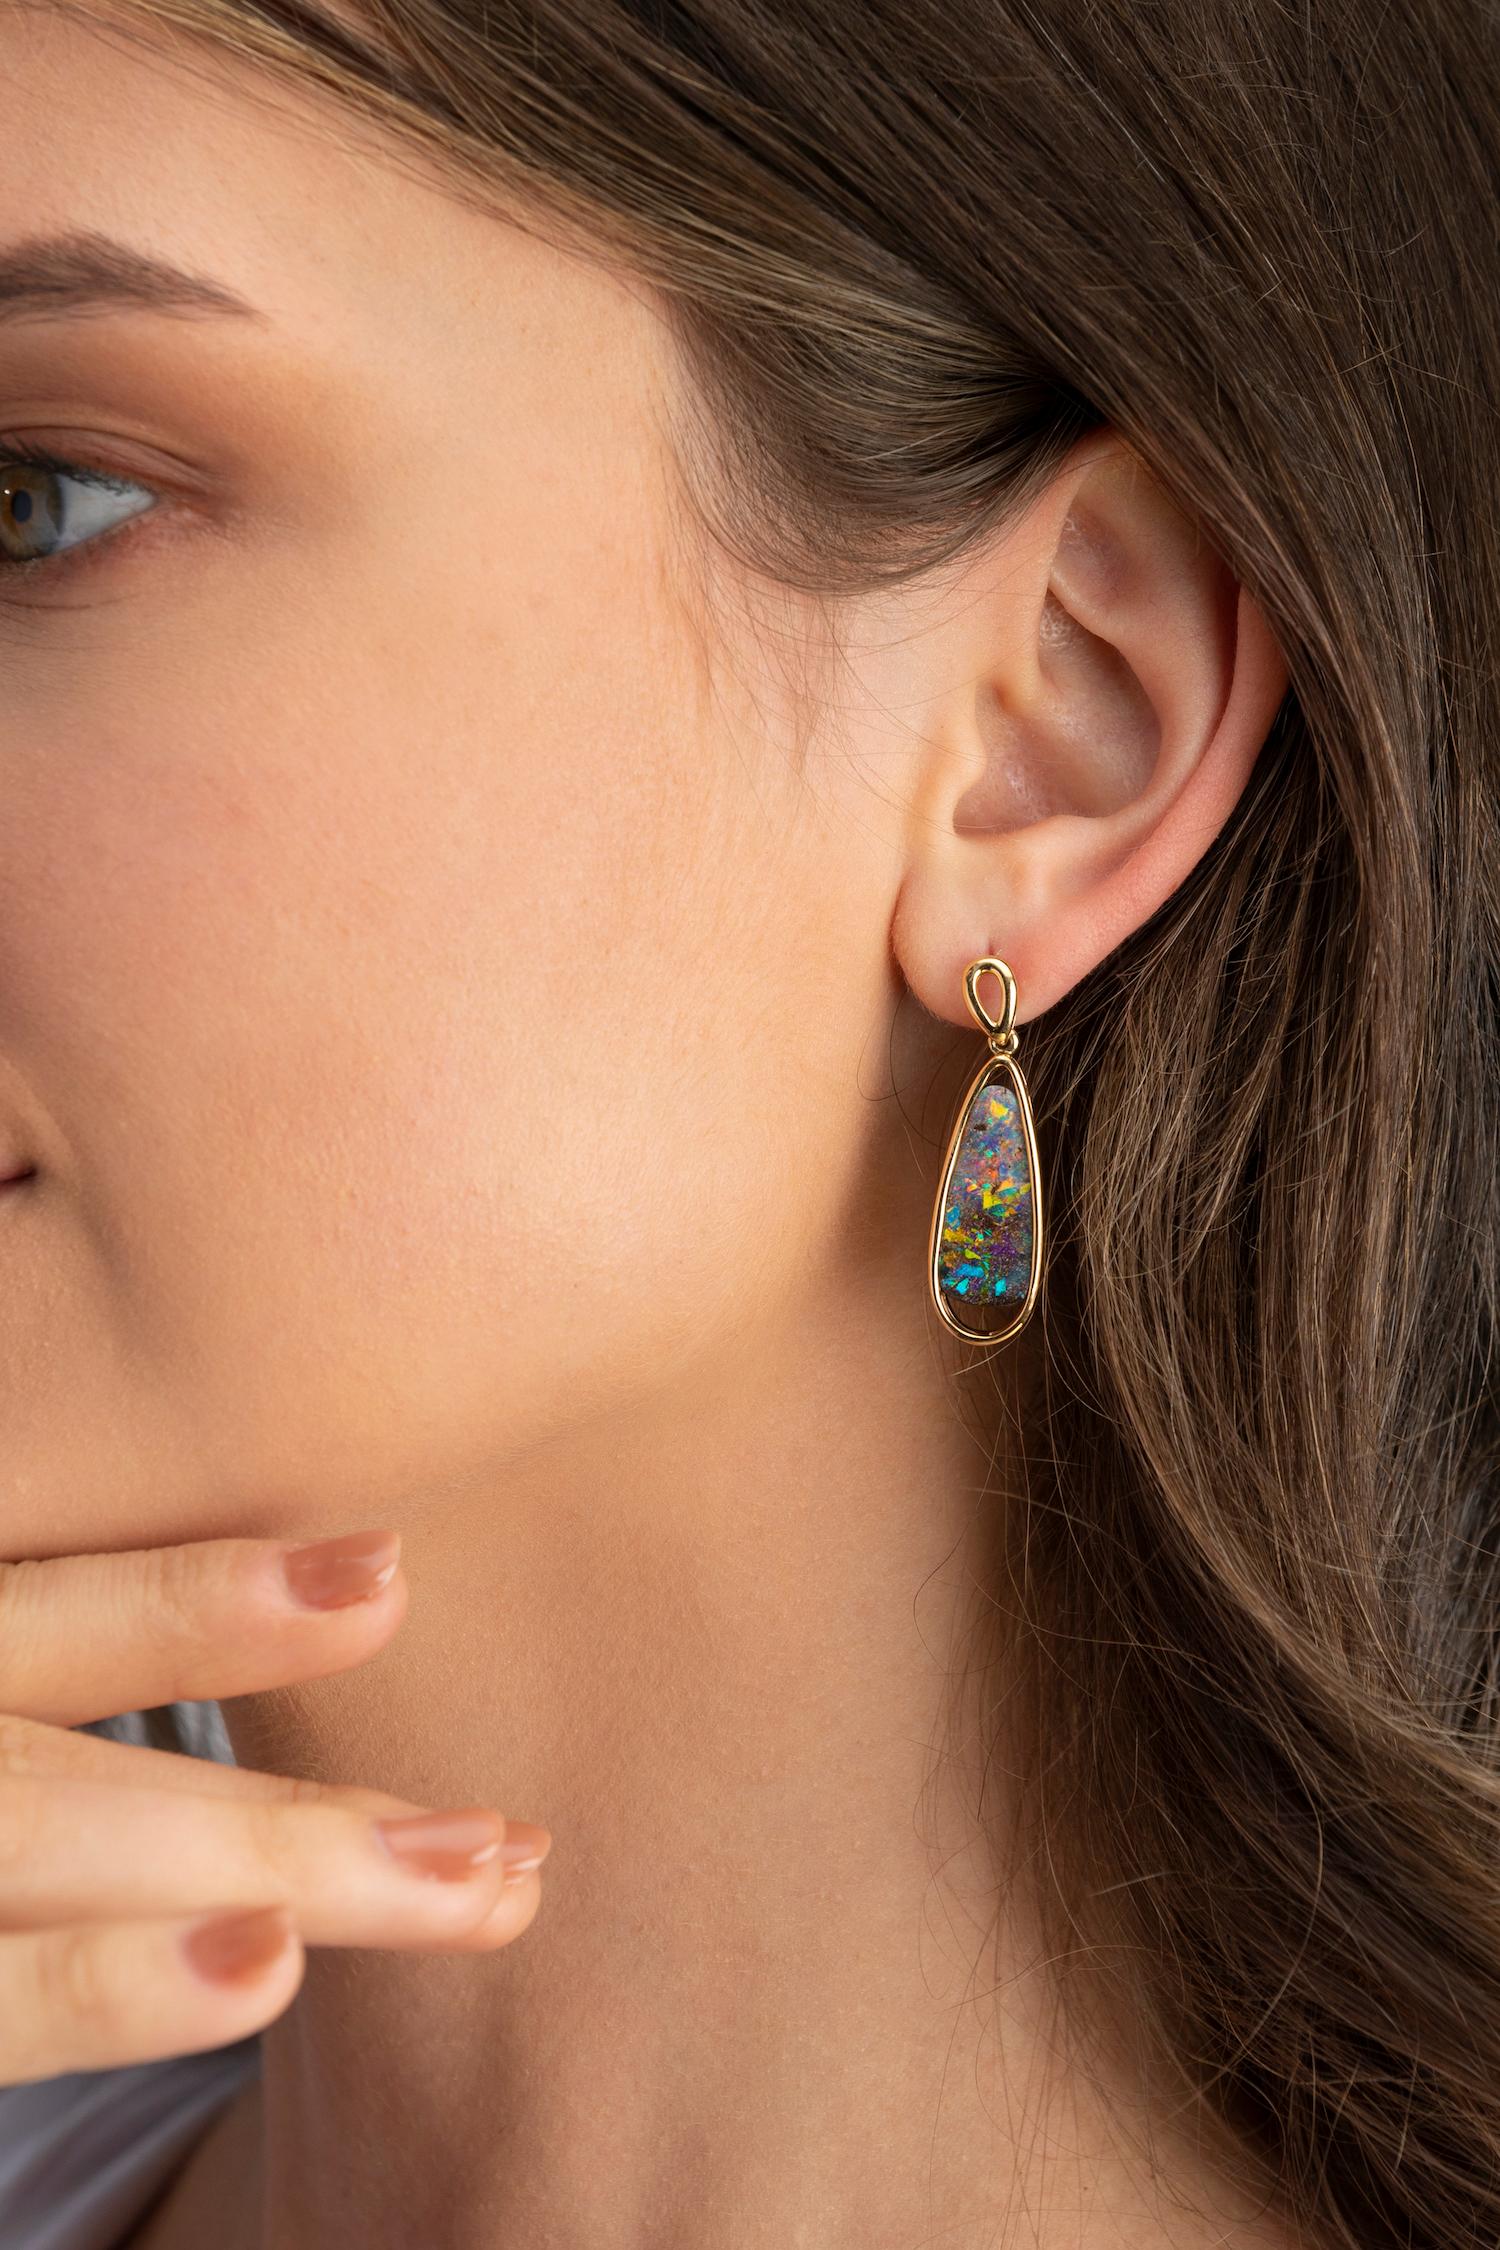 “Constellations” opal earrings capture the ethereal beauty of the night sky. This perfect pair of galaxy-patterned boulder opals (10.96ct) from Winton is crafted in our classic 18K yellow gold. Elegant and refined, these earrings are guaranteed to